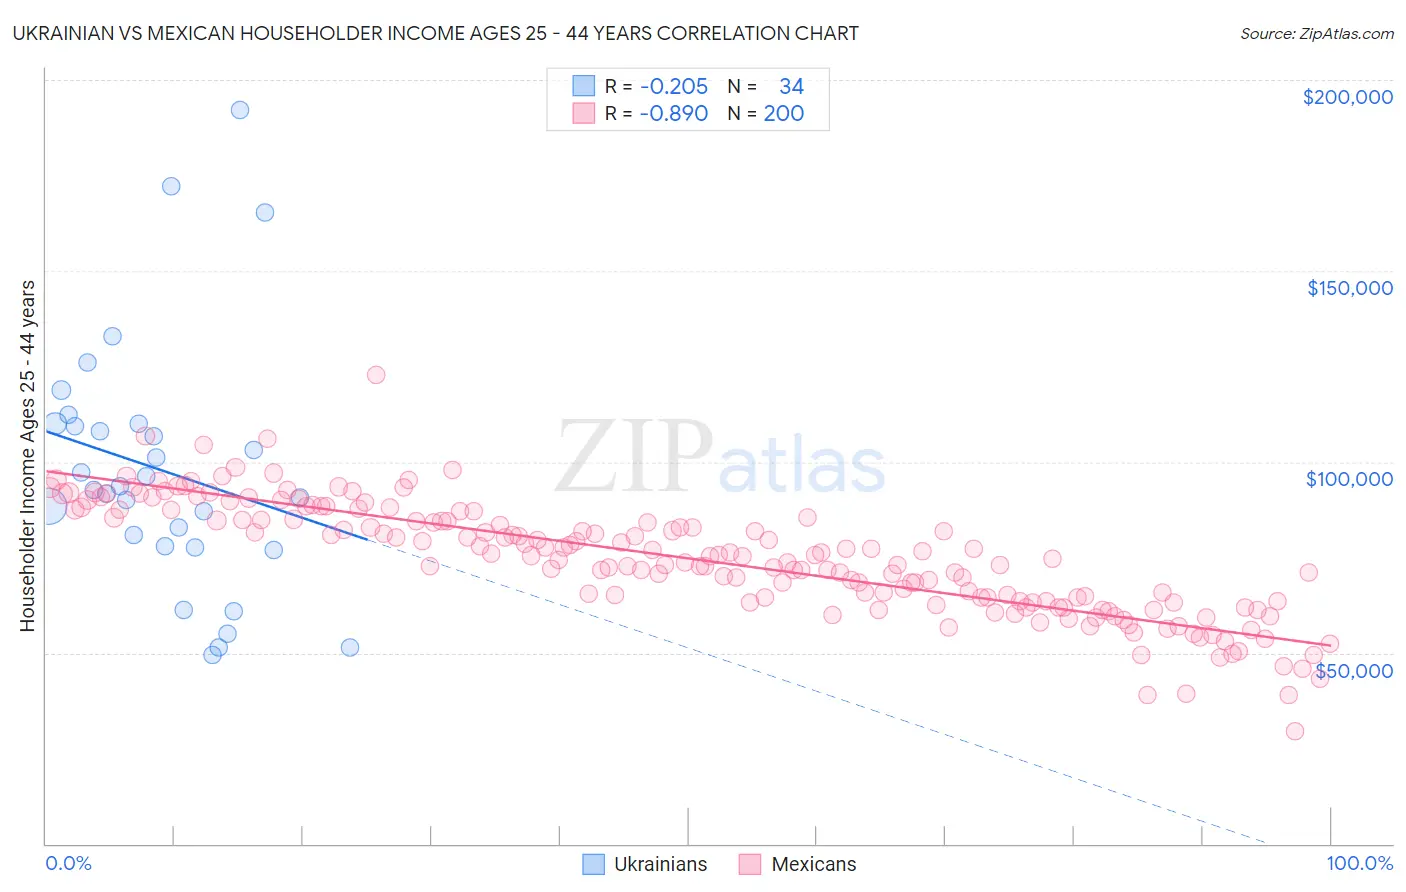 Ukrainian vs Mexican Householder Income Ages 25 - 44 years